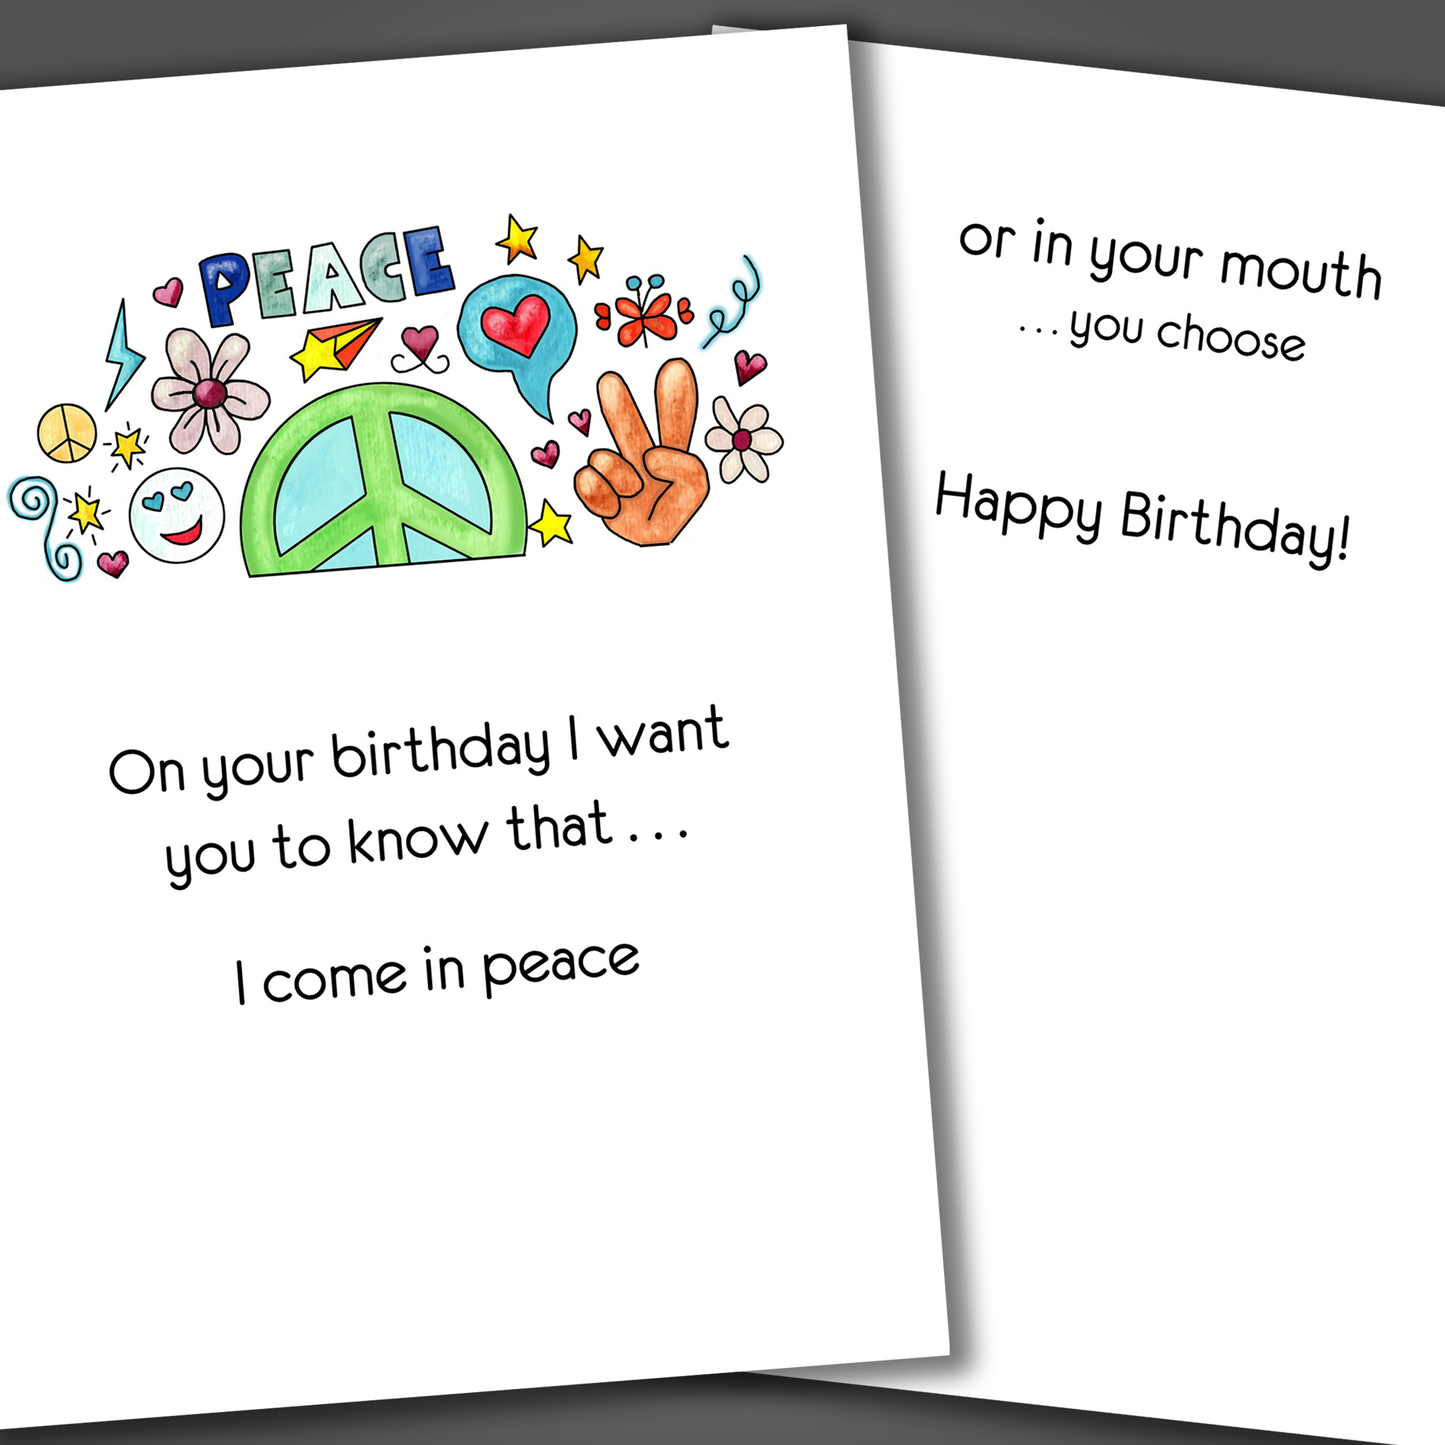 Funny birthday card with green peace symbol drawn on the front of card. Inside the card is a funny adult joke that ends in happy birthday!